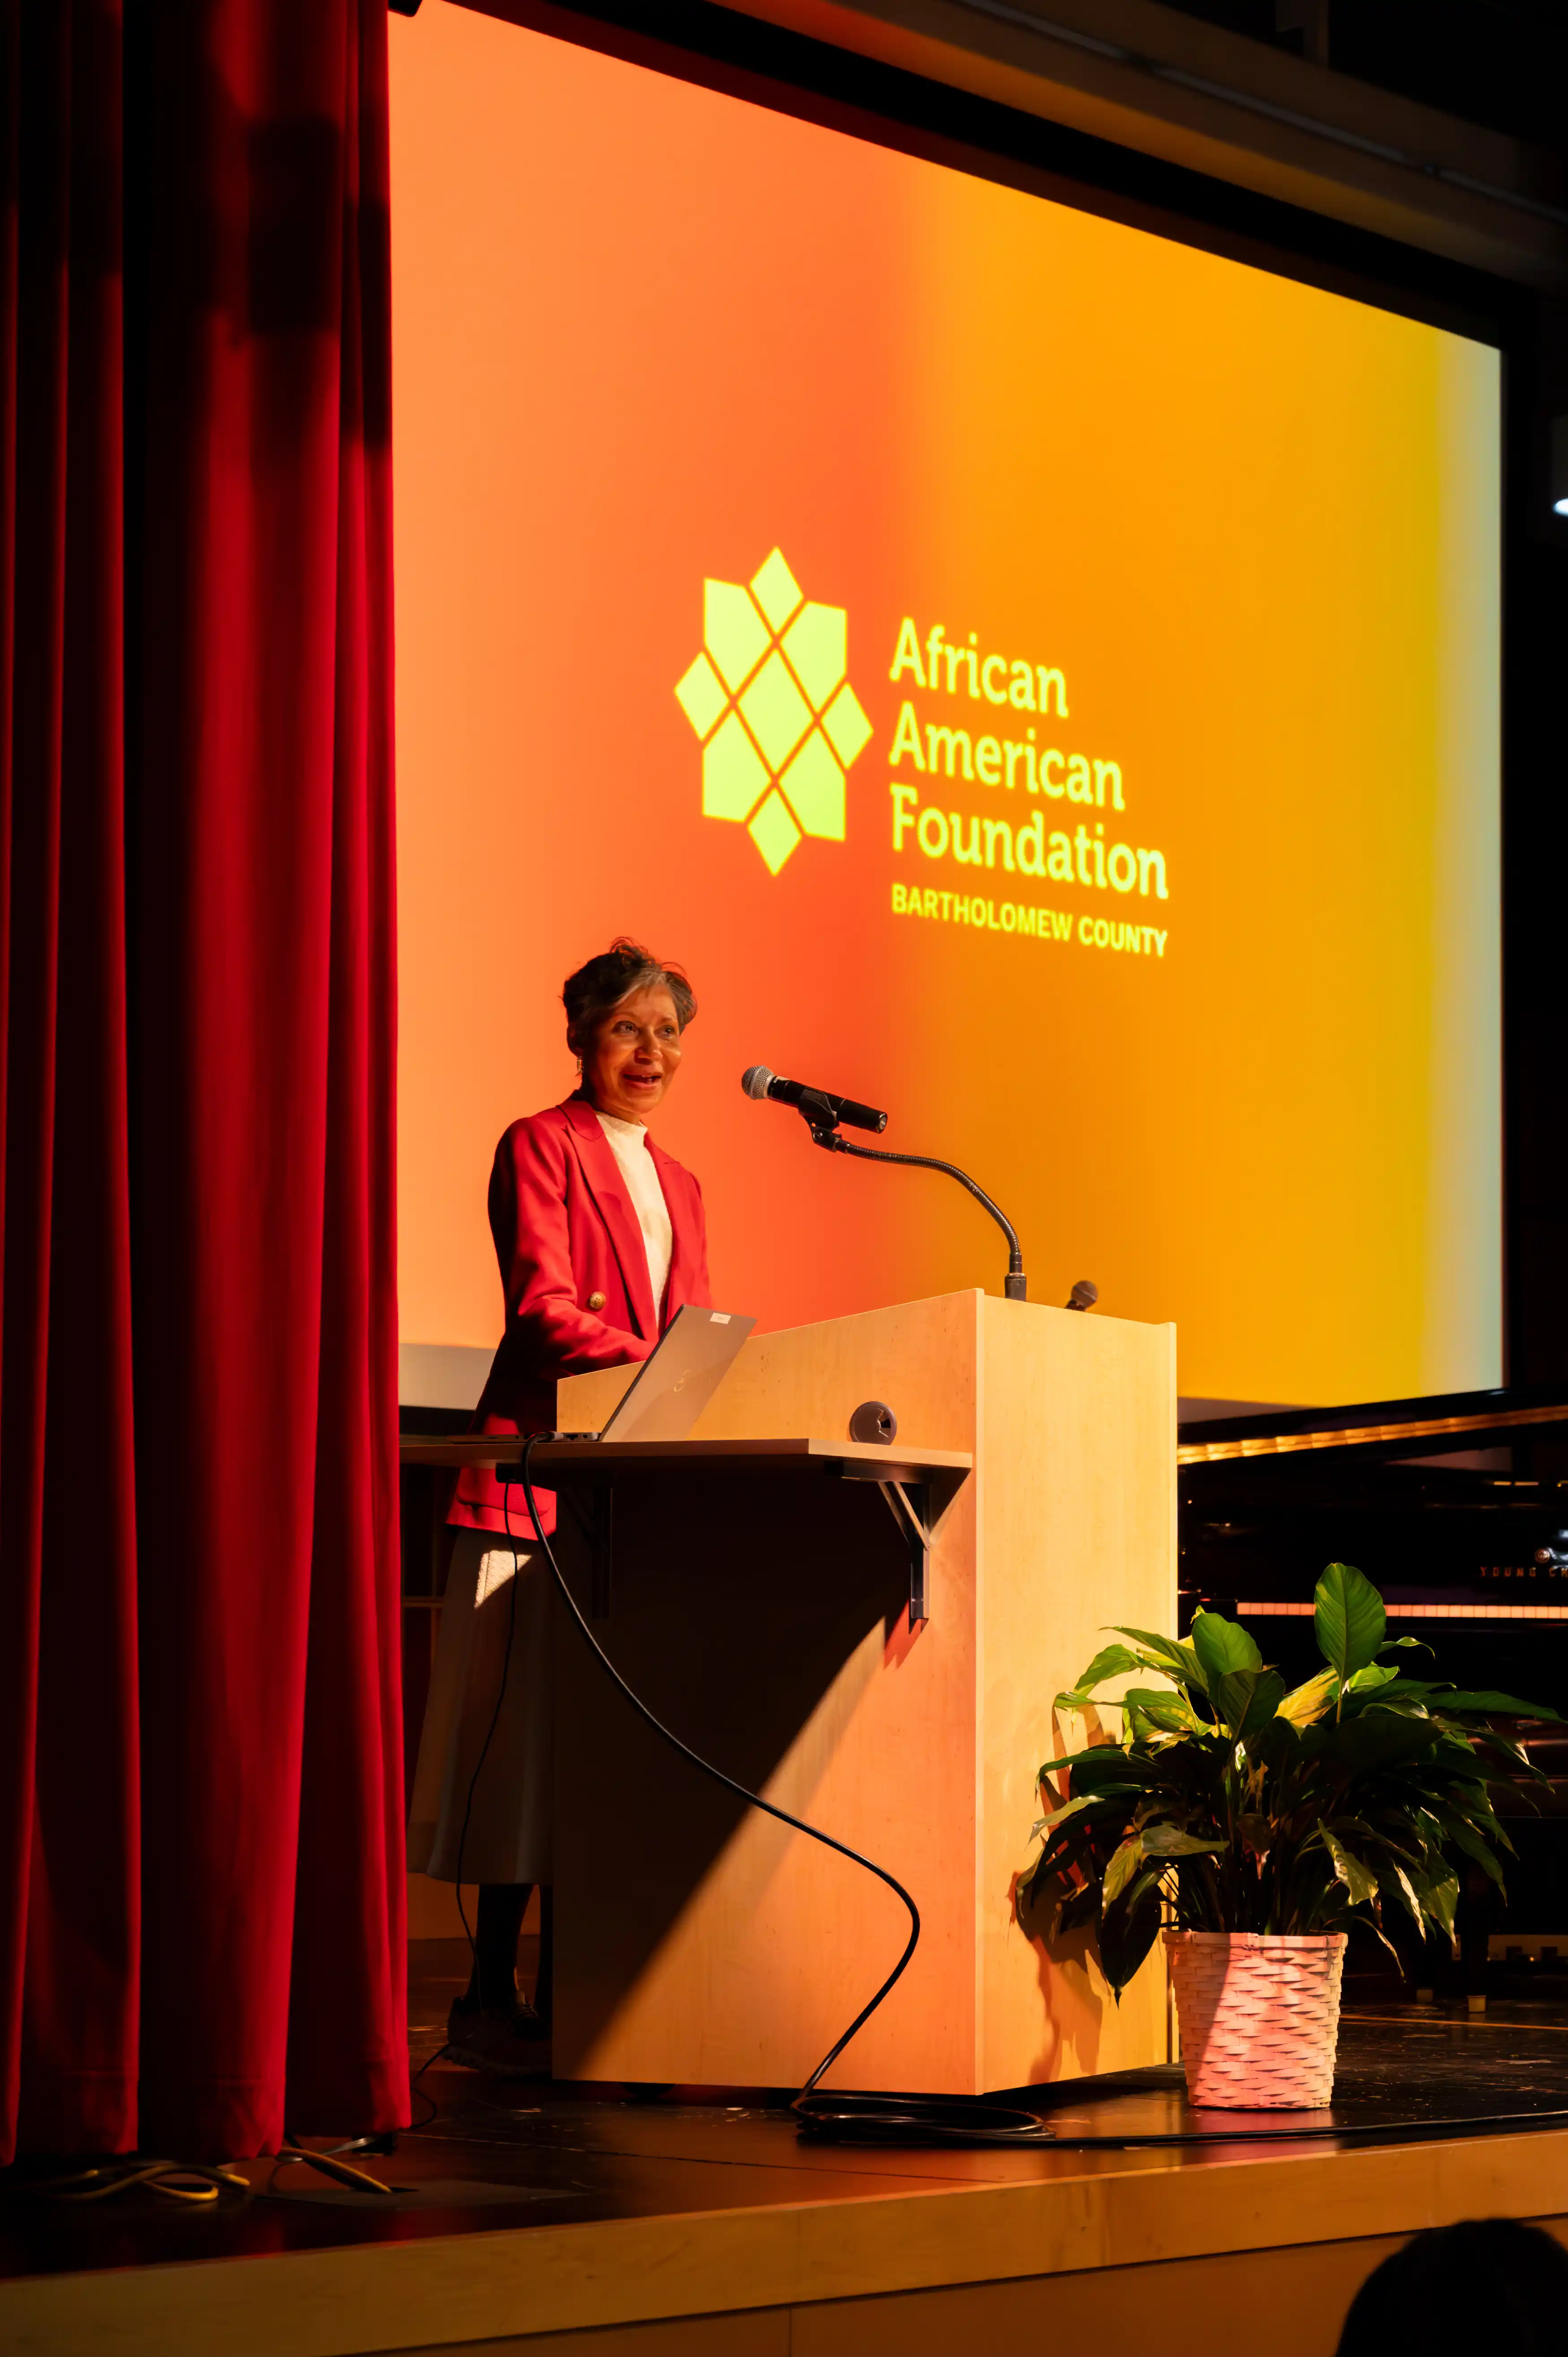 Person giving a speech at a podium with the African Studies Association logo on the screen behind.